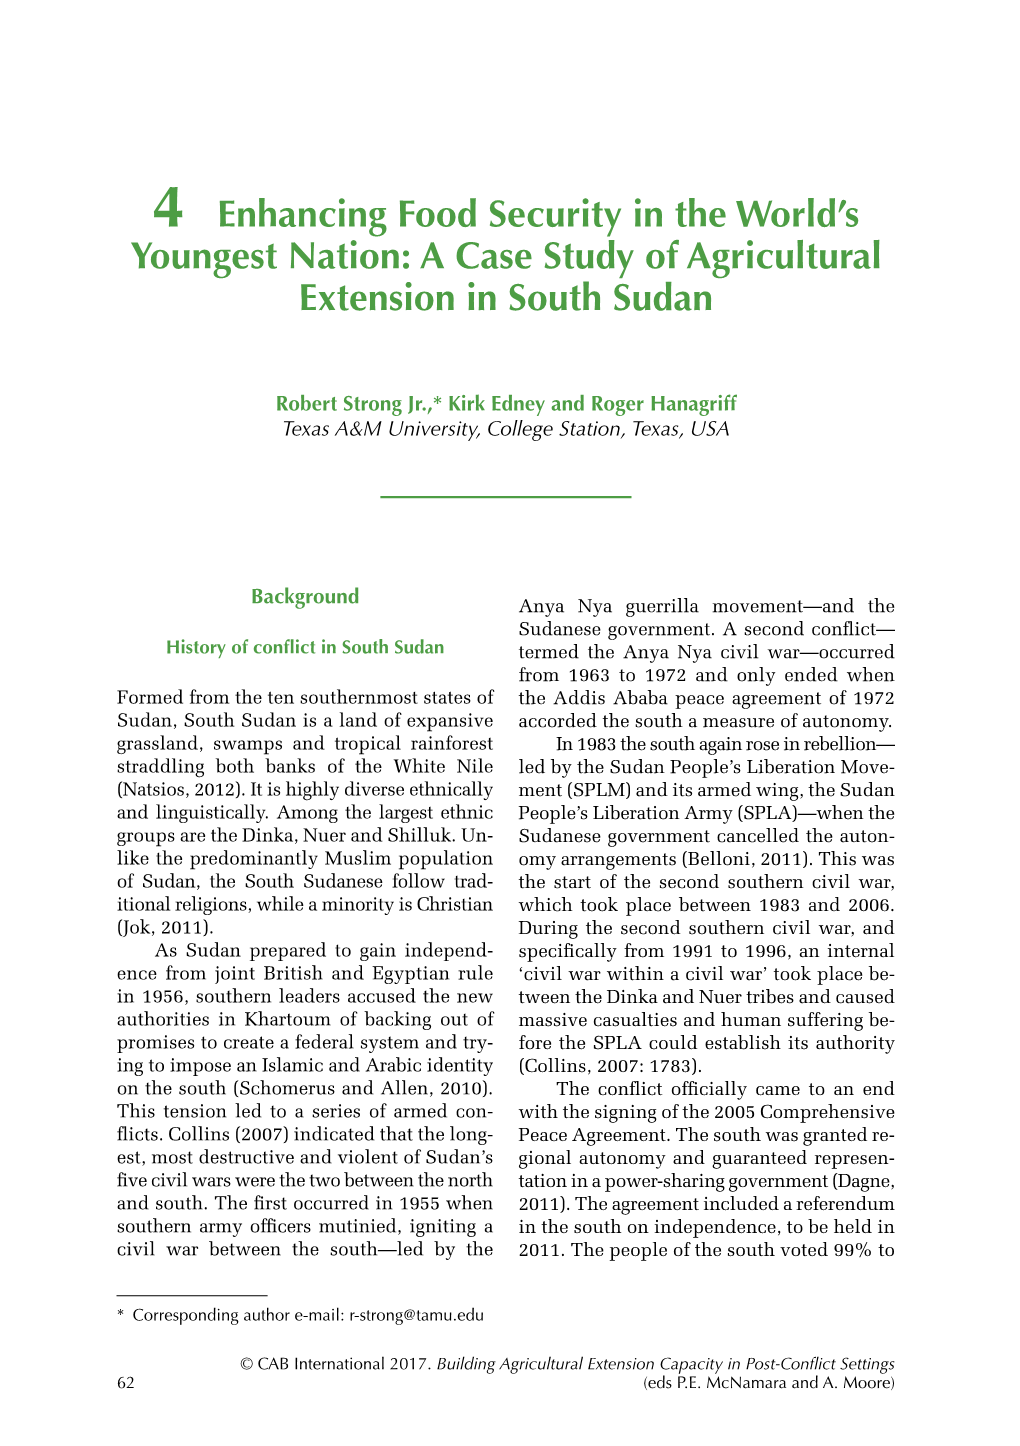 A Case Study of Agricultural Extension in South Sudan